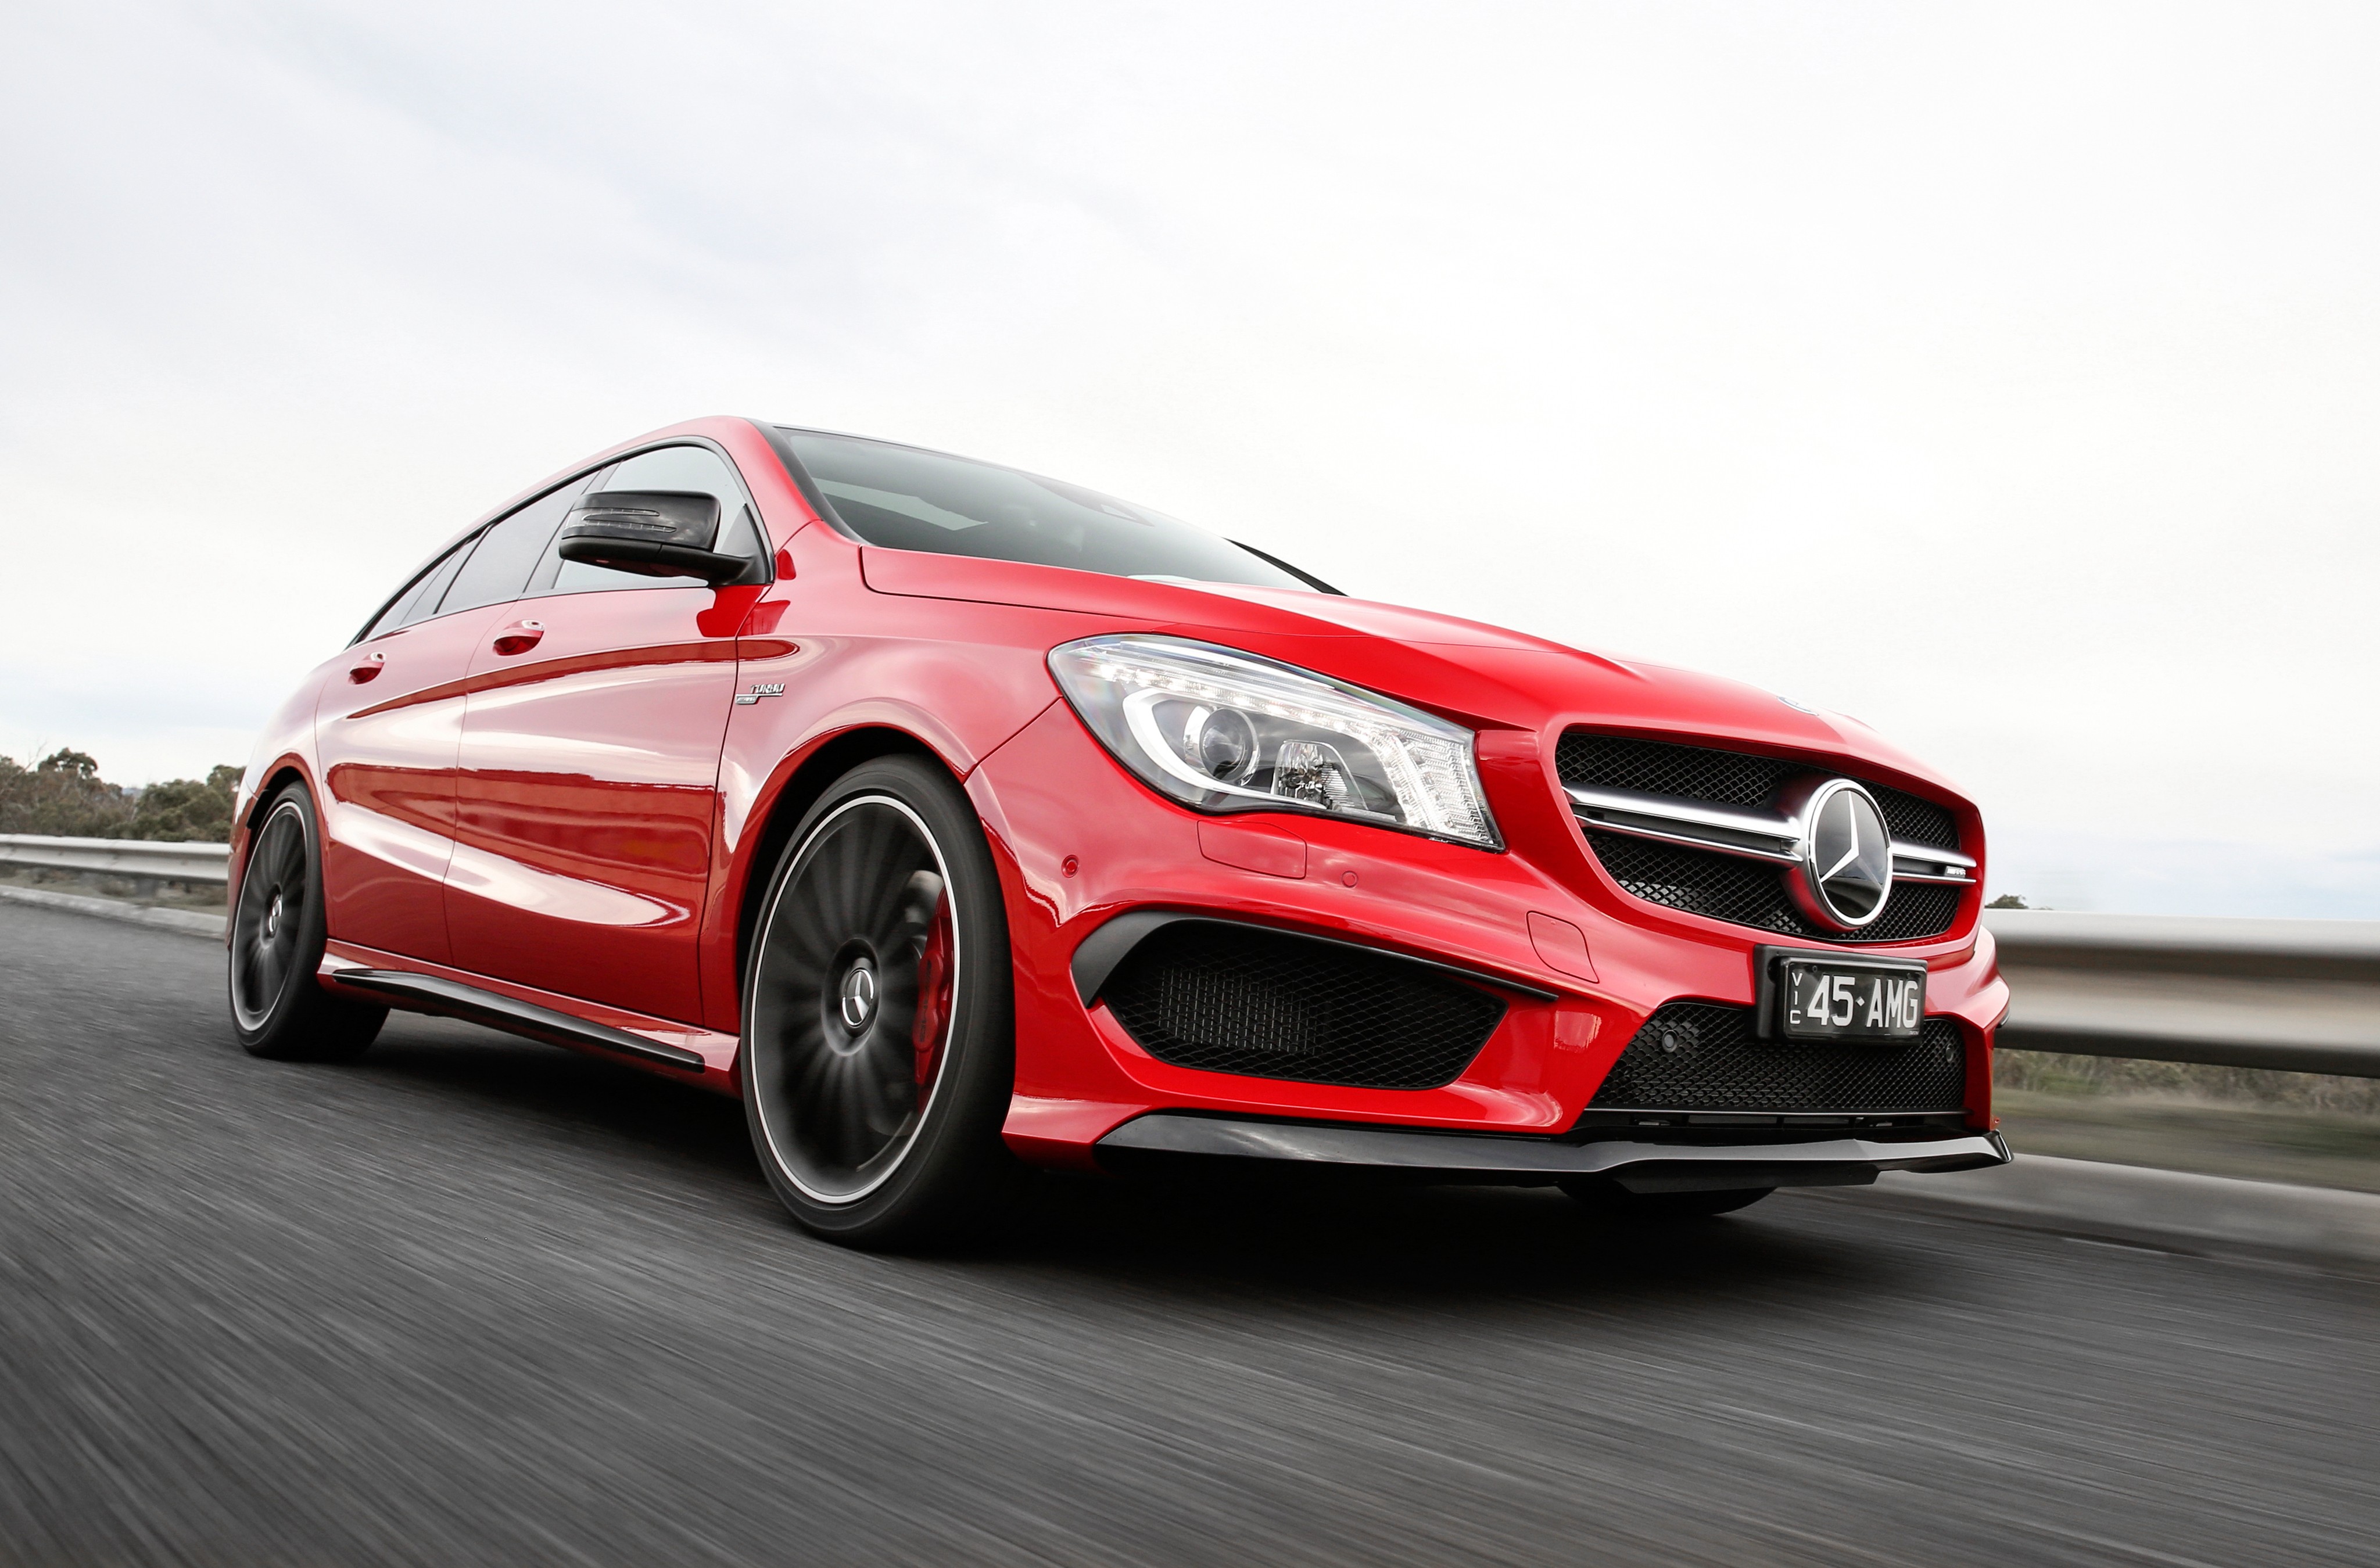 B&B Mercedes-Benz CLA 45 AMG is Capable of up to 450 HP/580 Nm